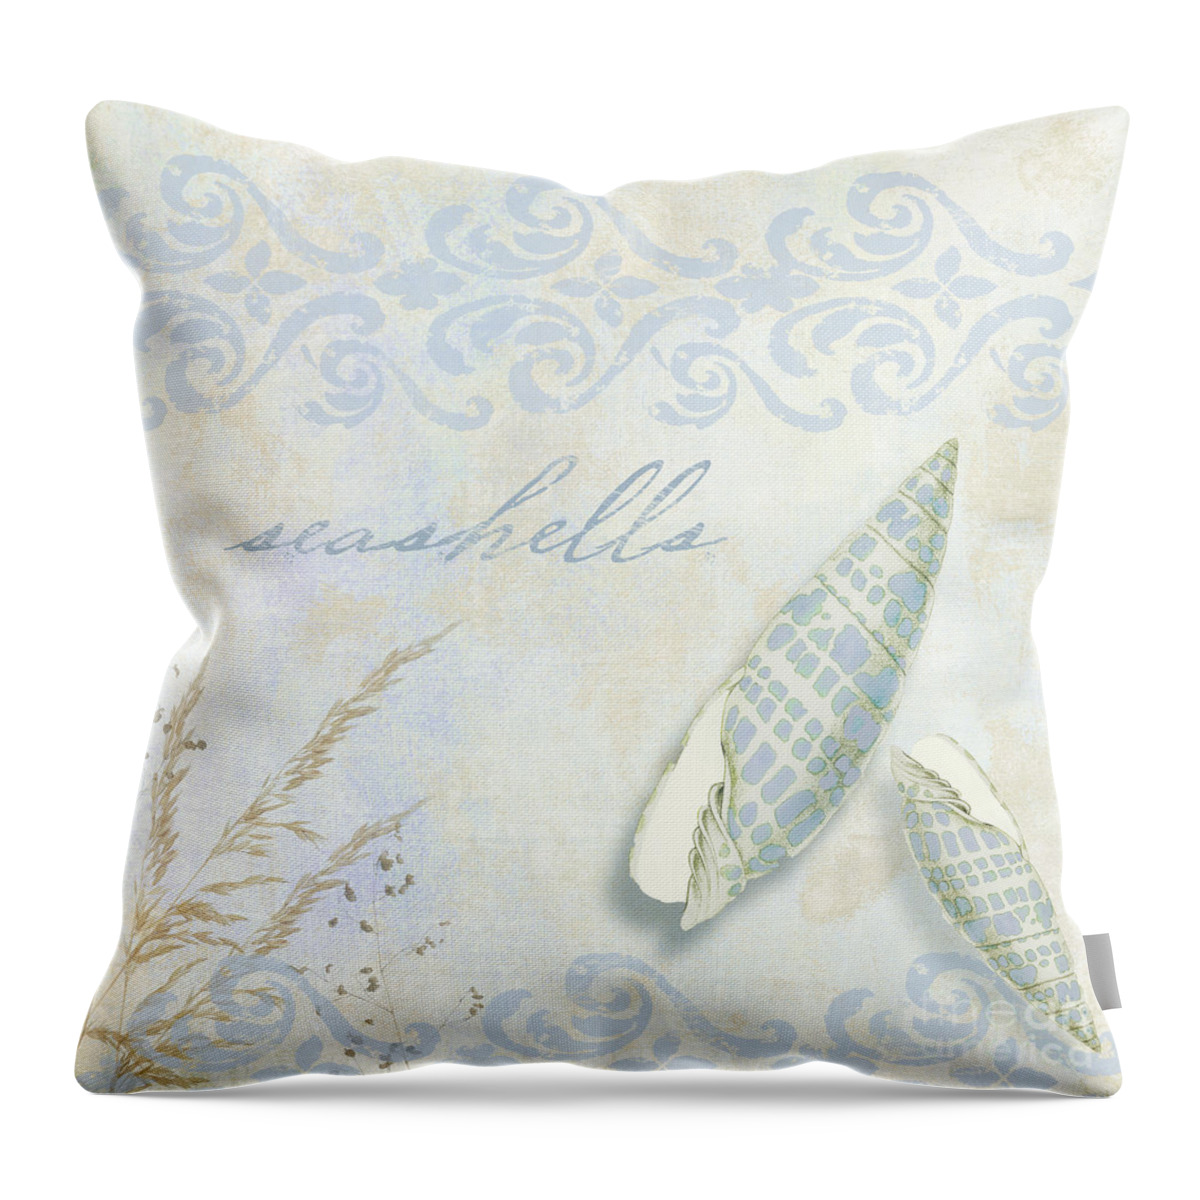 Seashells Throw Pillow featuring the painting She Sells Seashells II by Mindy Sommers